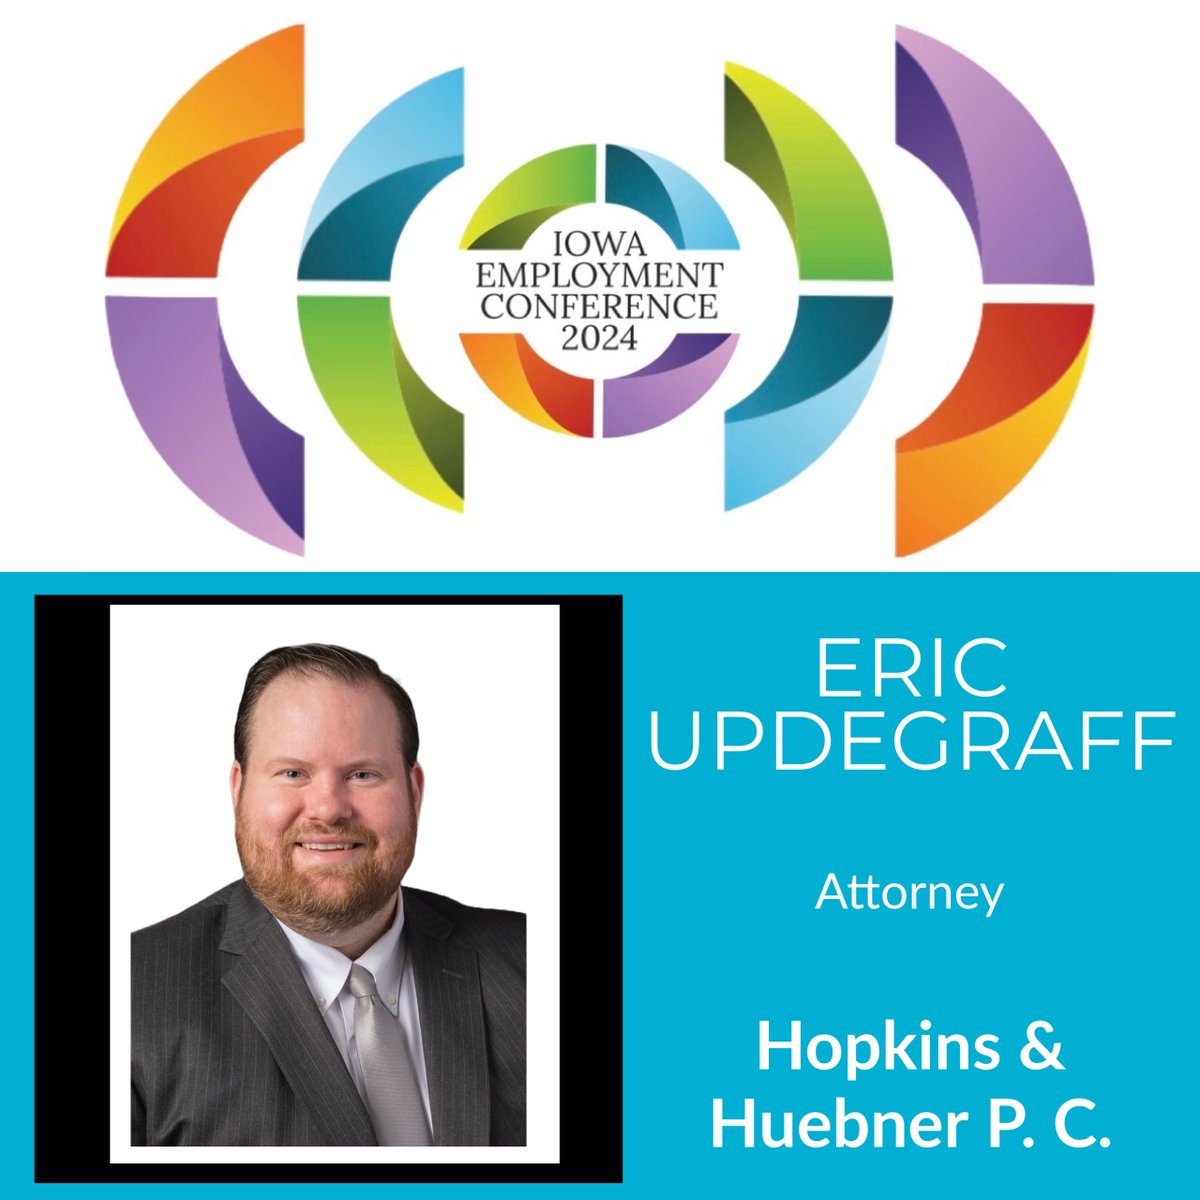 Super excited for #IEC2024 Speaker, Eric Updegraff, with Hopkins & Huebner P.C.! Bio here: conta.cc/42brAim Register to join us for an action-packed conference! conta.cc/42d7wMI #continuingeducation #professionaldevelopment #humanresources #leadership